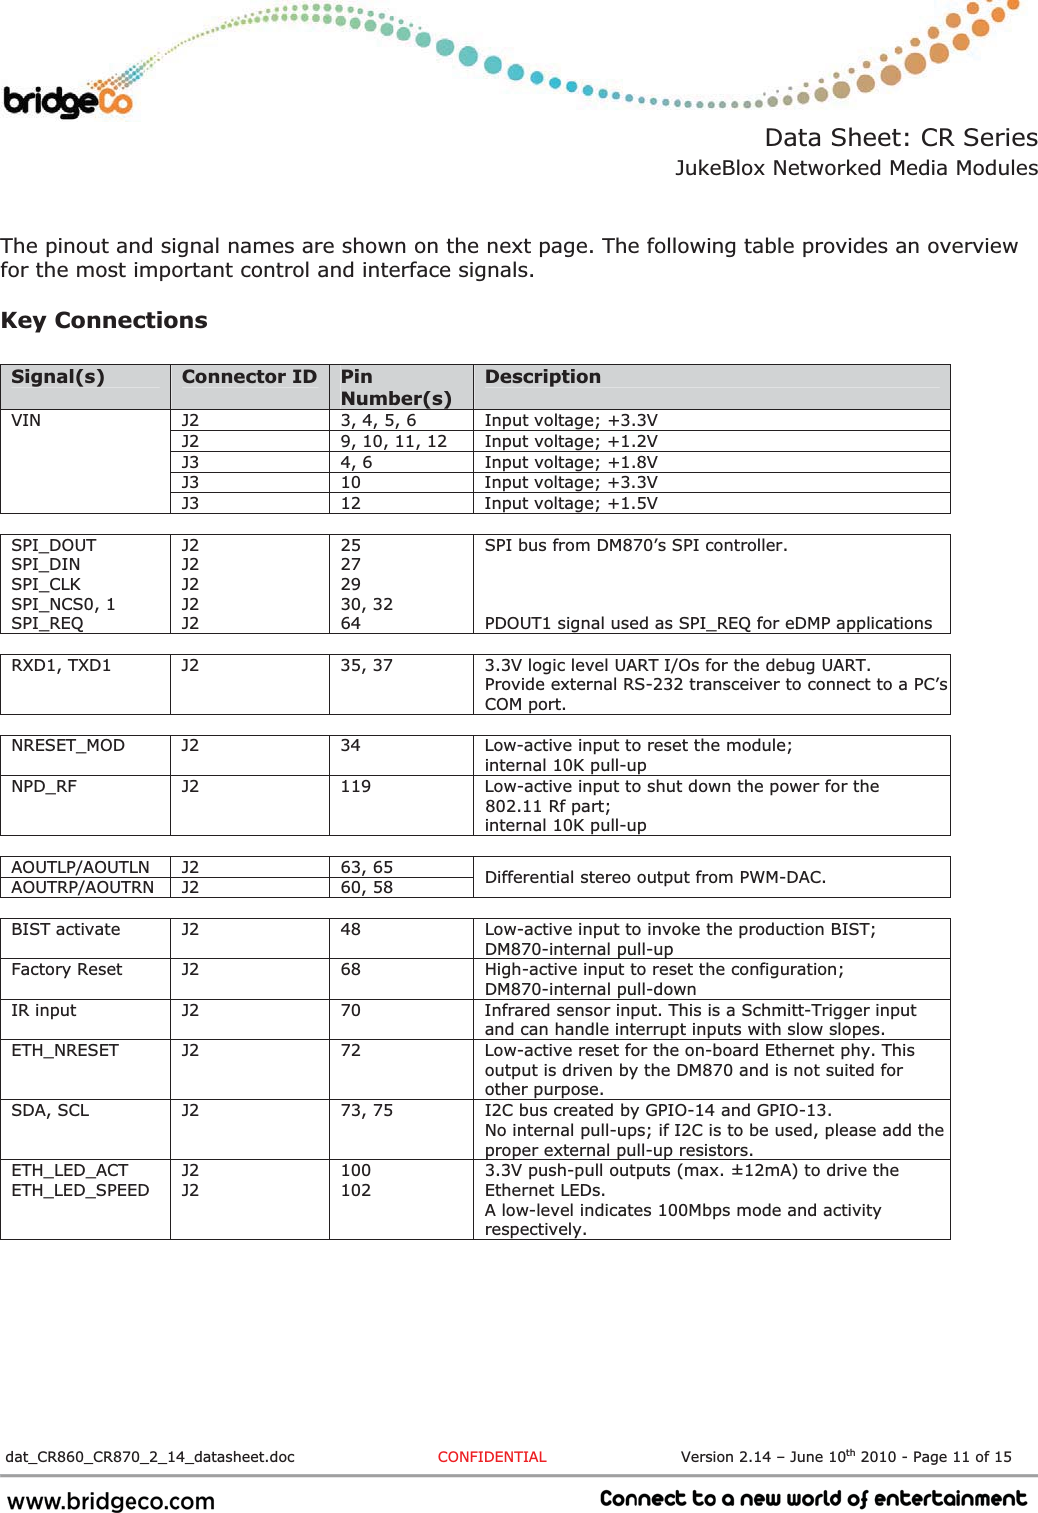 Data Sheet: CR Series JukeBlox Networked Media Modules  dat_CR860_CR870_2_14_datasheet.doc  CONFIDENTIAL                           Version 2.14 – June 10th 2010 - Page 11 of 15                             The pinout and signal names are shown on the next page. The following table provides an overview for the most important control and interface signals. Key Connections Signal(s) Connector ID  PinNumber(s)Description J2  3, 4, 5, 6  Input voltage; +3.3V J2  9, 10, 11, 12  Input voltage; +1.2V J3  4, 6  Input voltage; +1.8V J3 10 Input voltage; +3.3V VINJ3 12 Input voltage; +1.5V     SPI_DOUT SPI_DIN SPI_CLKSPI_NCS0, 1 J2 J2 J2 J2 25272930, 32 SPI bus from DM870’s SPI controller. SPI_REQ  J2  64  PDOUT1 signal used as SPI_REQ for eDMP applications     RXD1, TXD1  J2  35, 37  3.3V logic level UART I/Os for the debug UART. Provide external RS-232 transceiver to connect to a PC’s COM port.     NRESET_MOD  J2  34  Low-active input to reset the module; internal 10K pull-up NPD_RF  J2  119  Low-active input to shut down the power for the 802.11 Rf part; internal 10K pull-up     AOUTLP/AOUTLN J2  63, 65 AOUTRP/AOUTRN J2  60, 58  Differential stereo output from PWM-DAC.     BIST activate  J2  48  Low-active input to invoke the production BIST; DM870-internal pull-up Factory Reset  J2  68  High-active input to reset the configuration; DM870-internal pull-downIR input  J2  70  Infrared sensor input. This is a Schmitt-Trigger input and can handle interrupt inputs with slow slopes. ETH_NRESET  J2  72  Low-active reset for the on-board Ethernet phy. This output is driven by the DM870 and is not suited for other purpose. SDA, SCL  J2  73, 75  I2C bus created by GPIO-14 and GPIO-13. No internal pull-ups; if I2C is to be used, please add the proper external pull-up resistors. ETH_LED_ACT ETH_LED_SPEED J2 J2 1001023.3V push-pull outputs (max. ±12mA) to drive the Ethernet LEDs. A low-level indicates 100Mbps mode and activity respectively. 